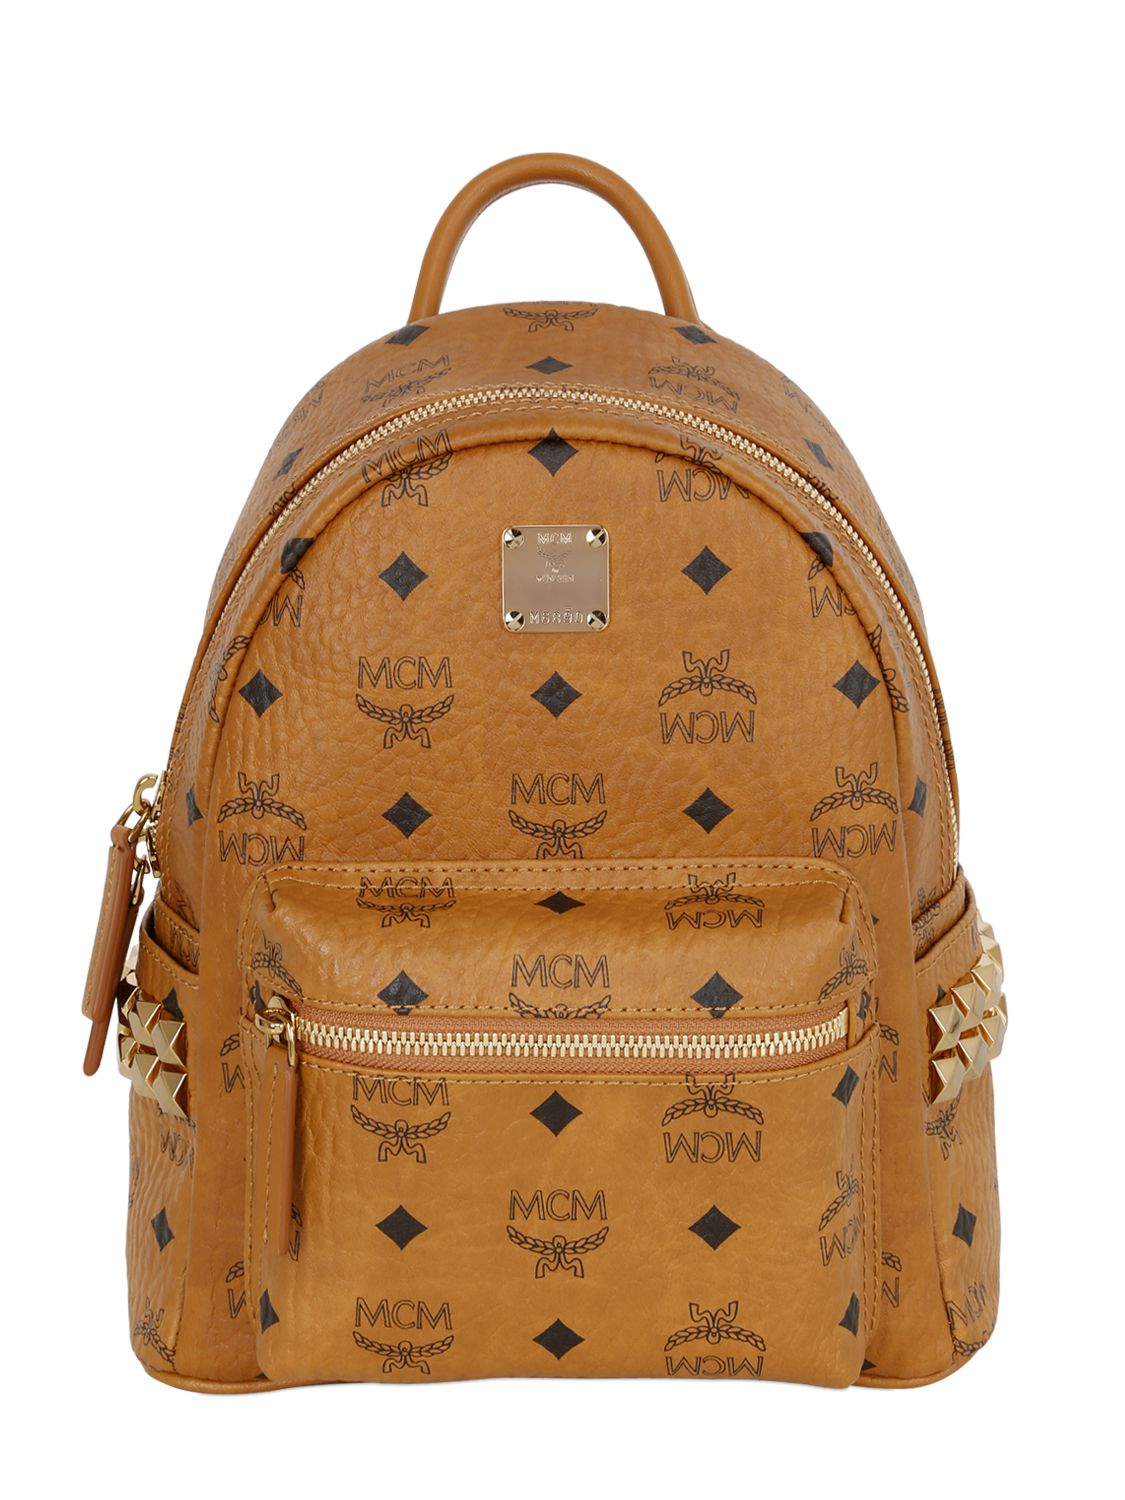 Mcm Mini Stark Faux Leather Backpack in Multicolor (TAN) | Lyst